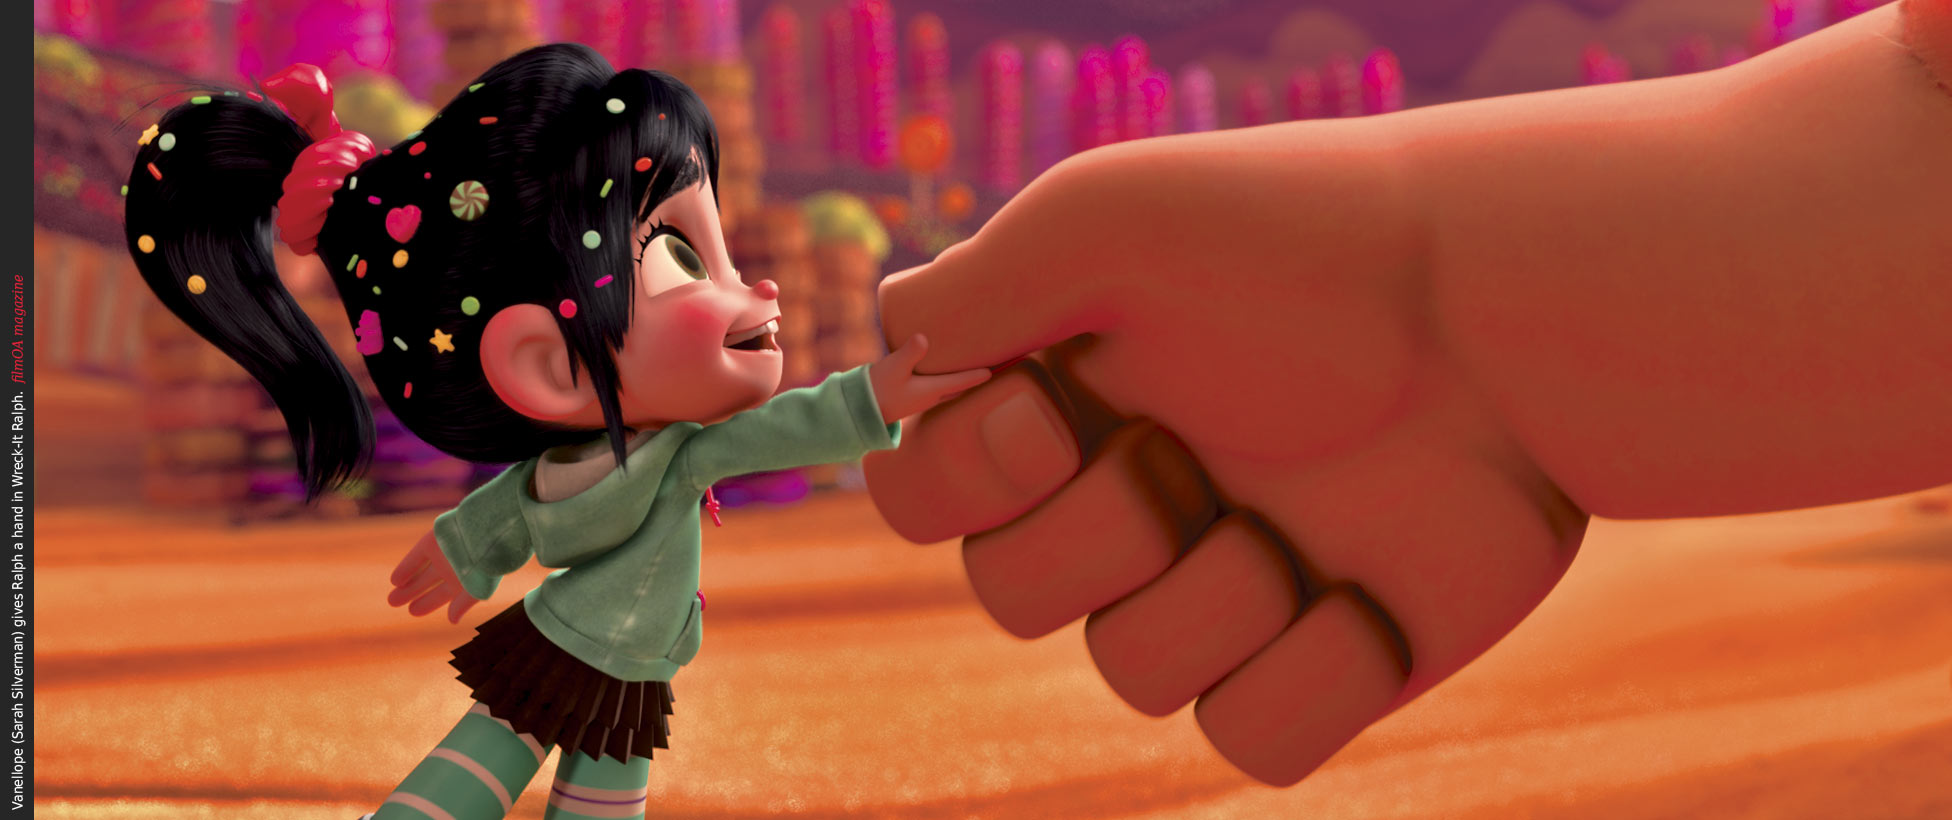 John C. Reilly gets animated in “Wreck-It Ralph” – The Oakland Press